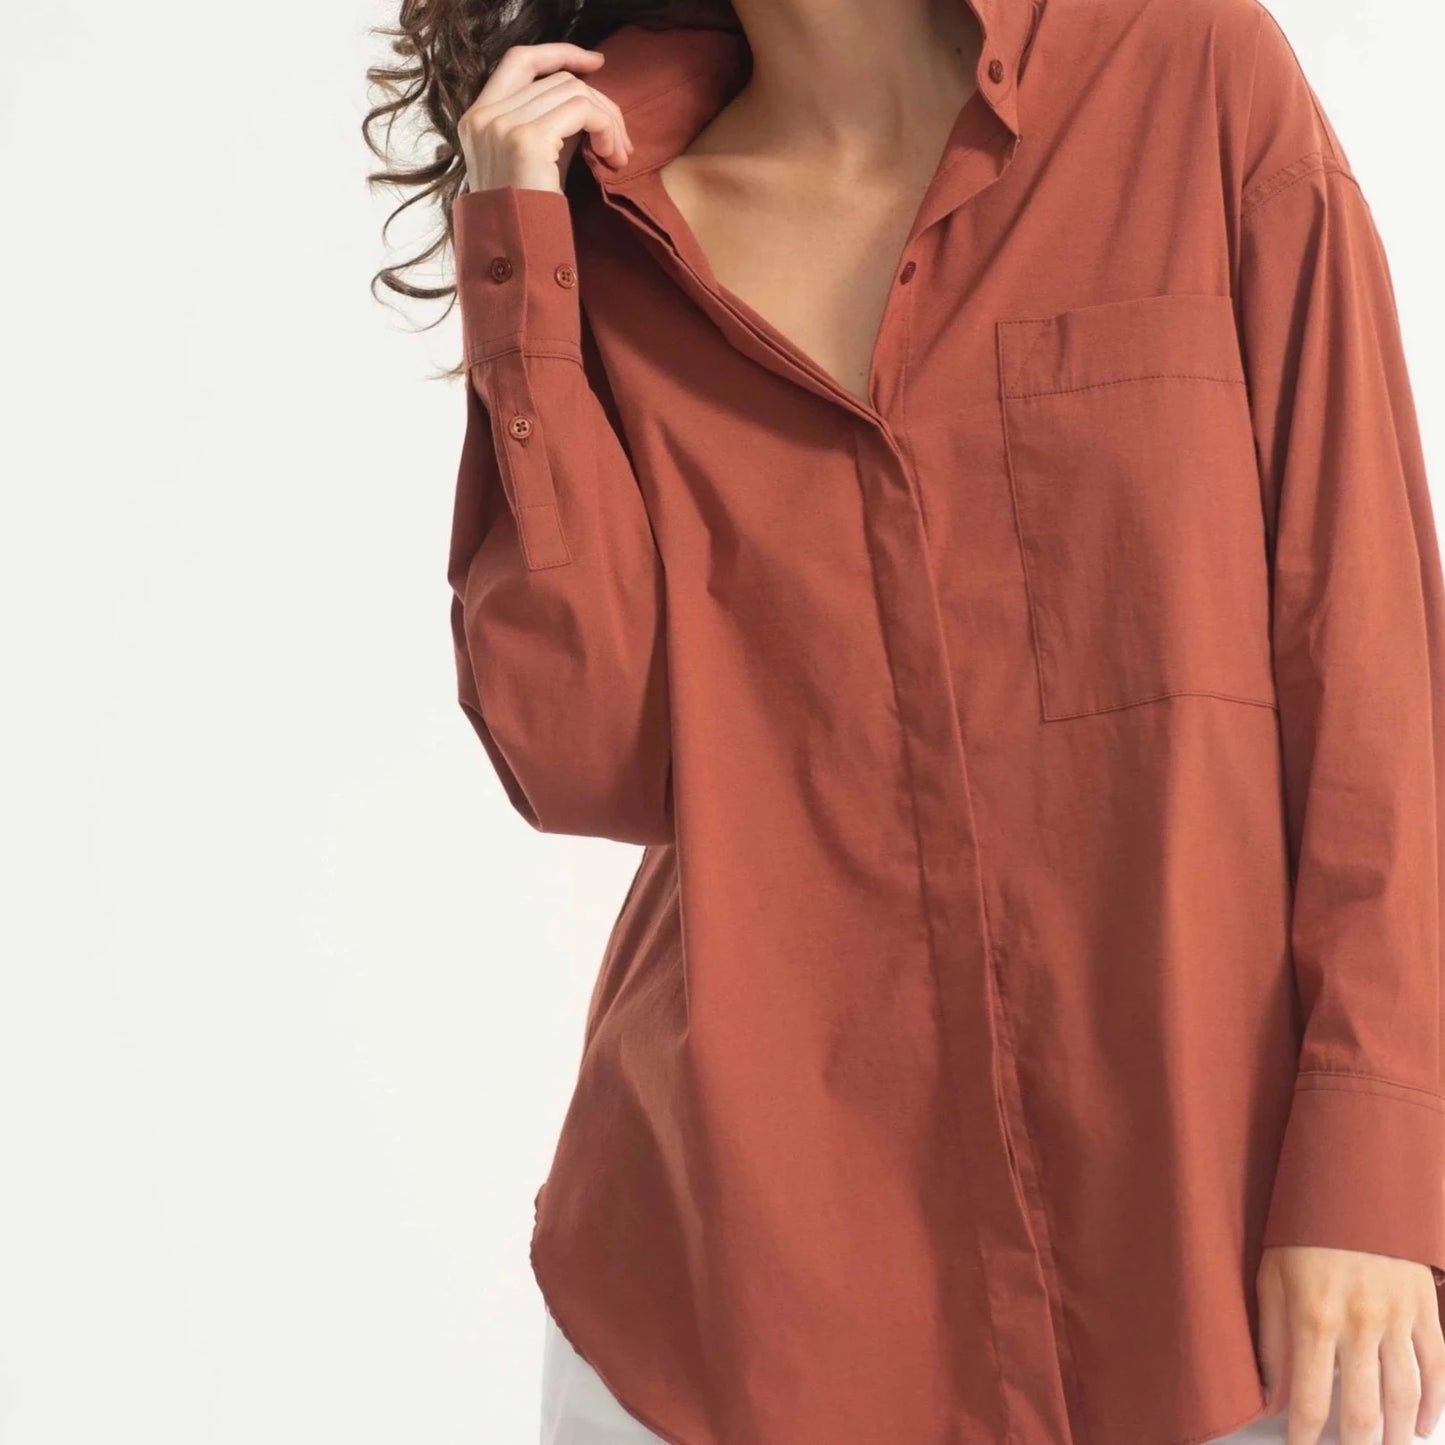 Mela Purdie Relaxed Pocket Shirt WAS $325